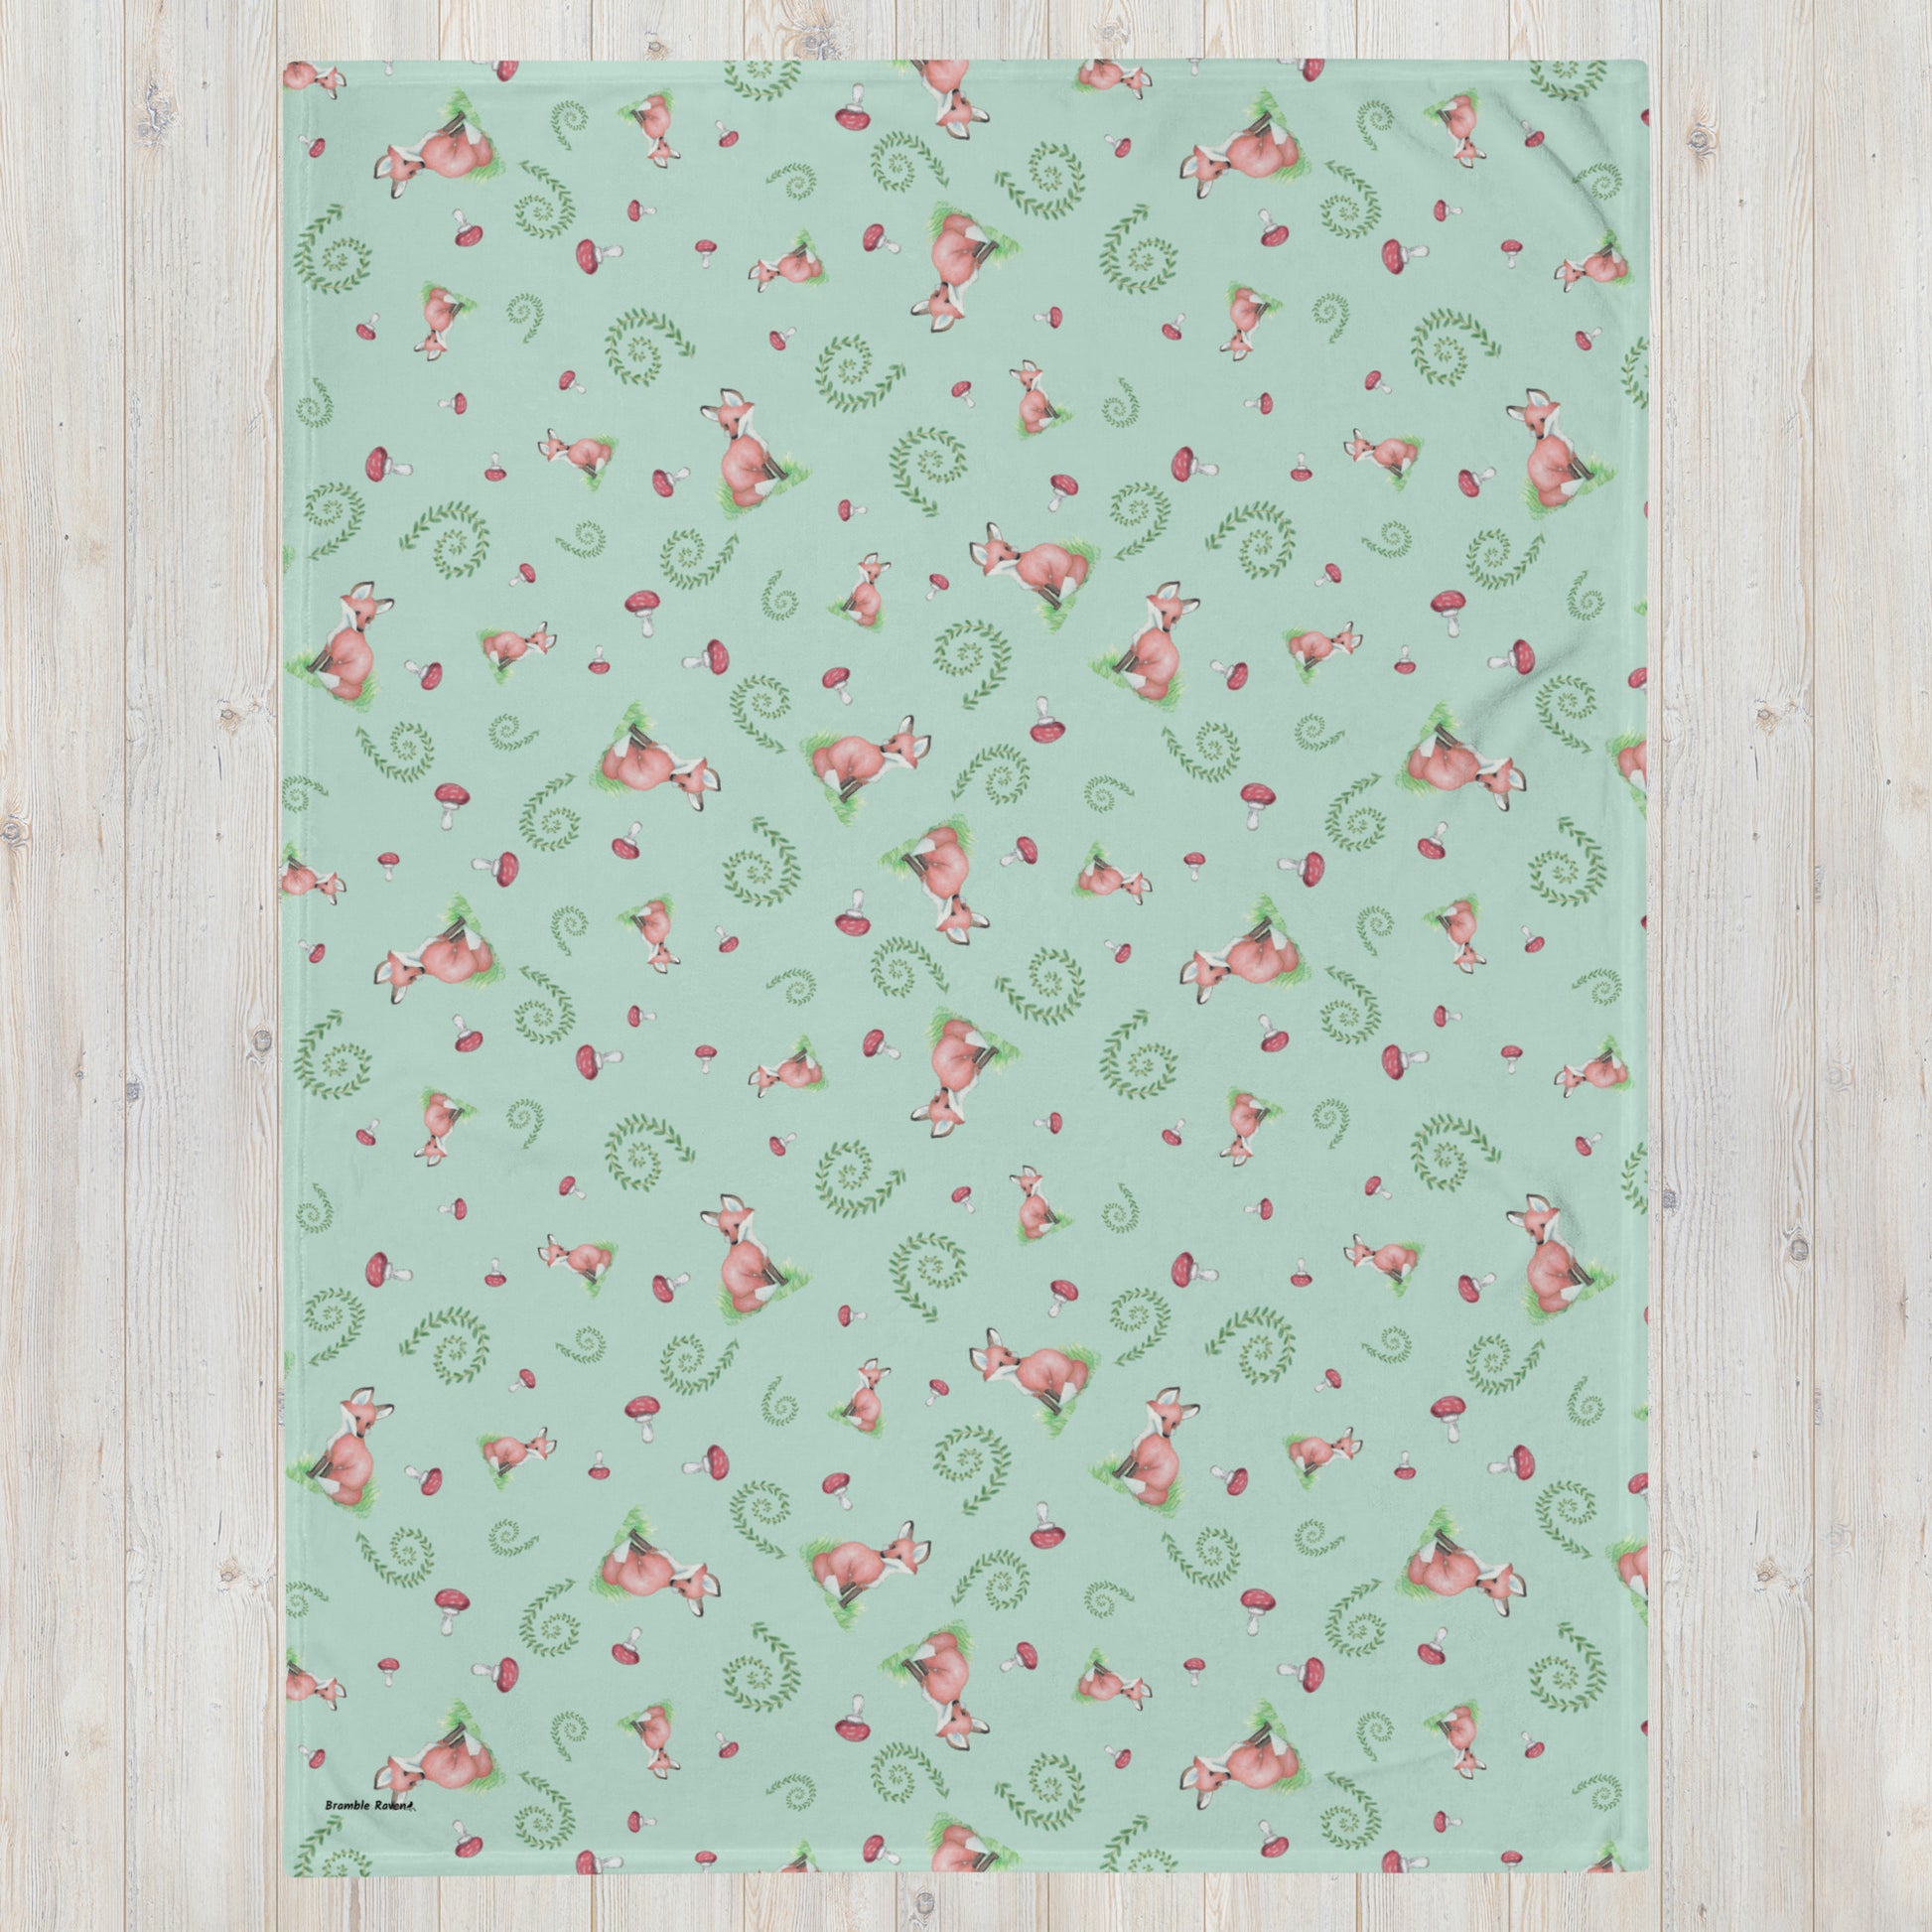 60 by 80 inch watercolor forest fox patterned blanket. Made of soft and fluffy polyester. Has foxes, mushrooms, and ferns on light green background. White underside. Machine-washable, hypoallergenic, and flame retardant. Shown on floor.